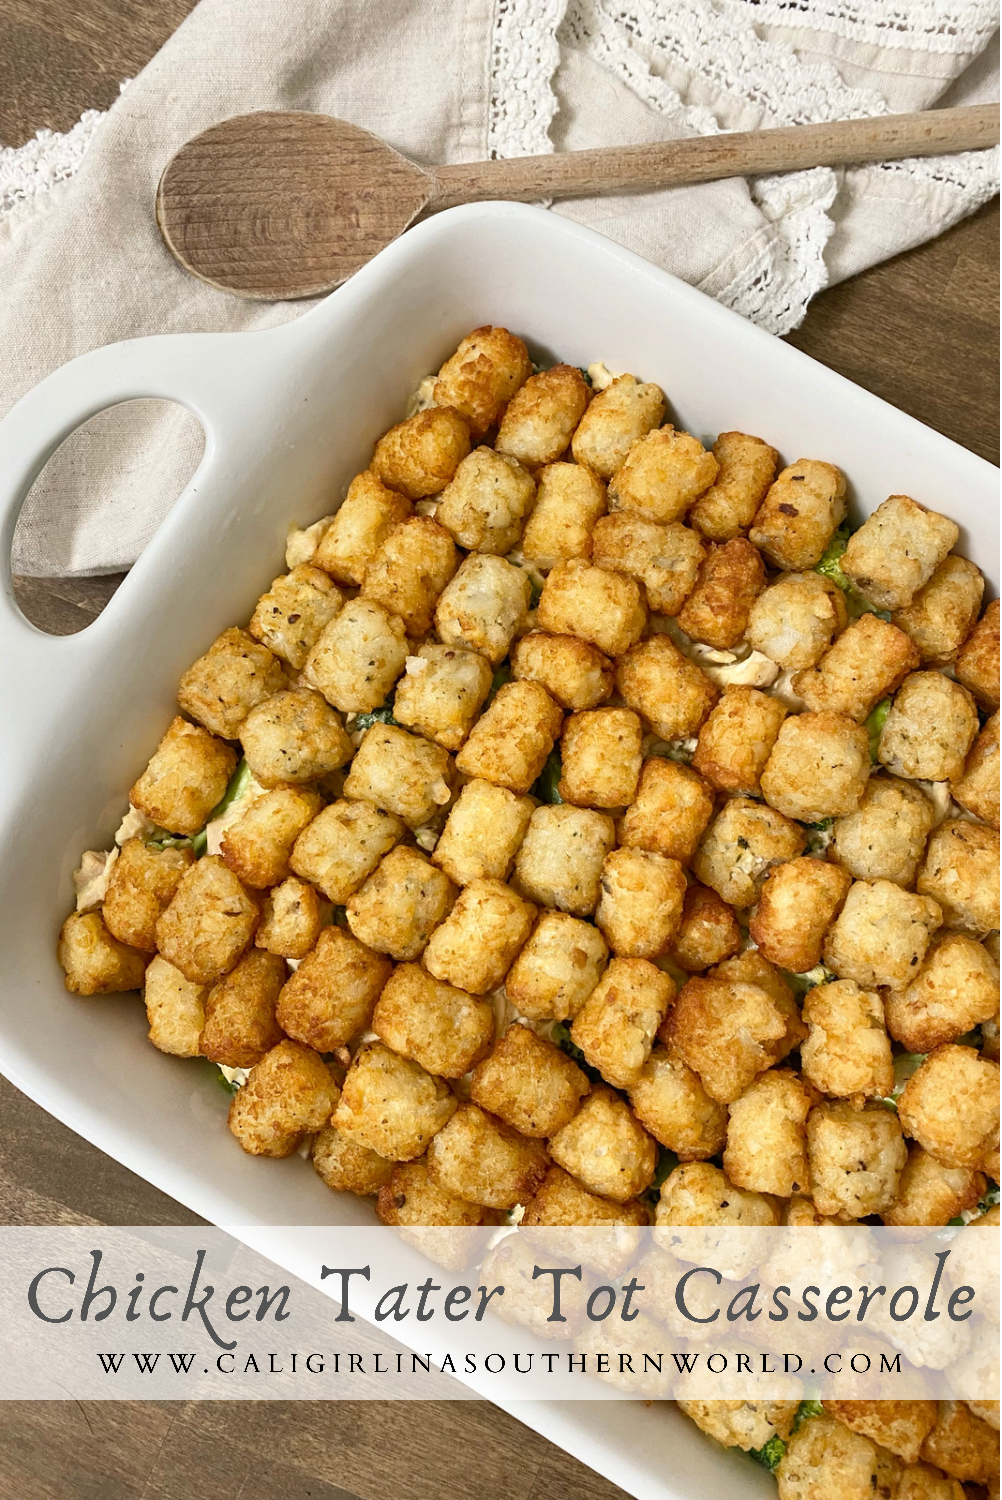 Pinterest Pin for Chicken Tater Tot Casserole shown in a baking dish.